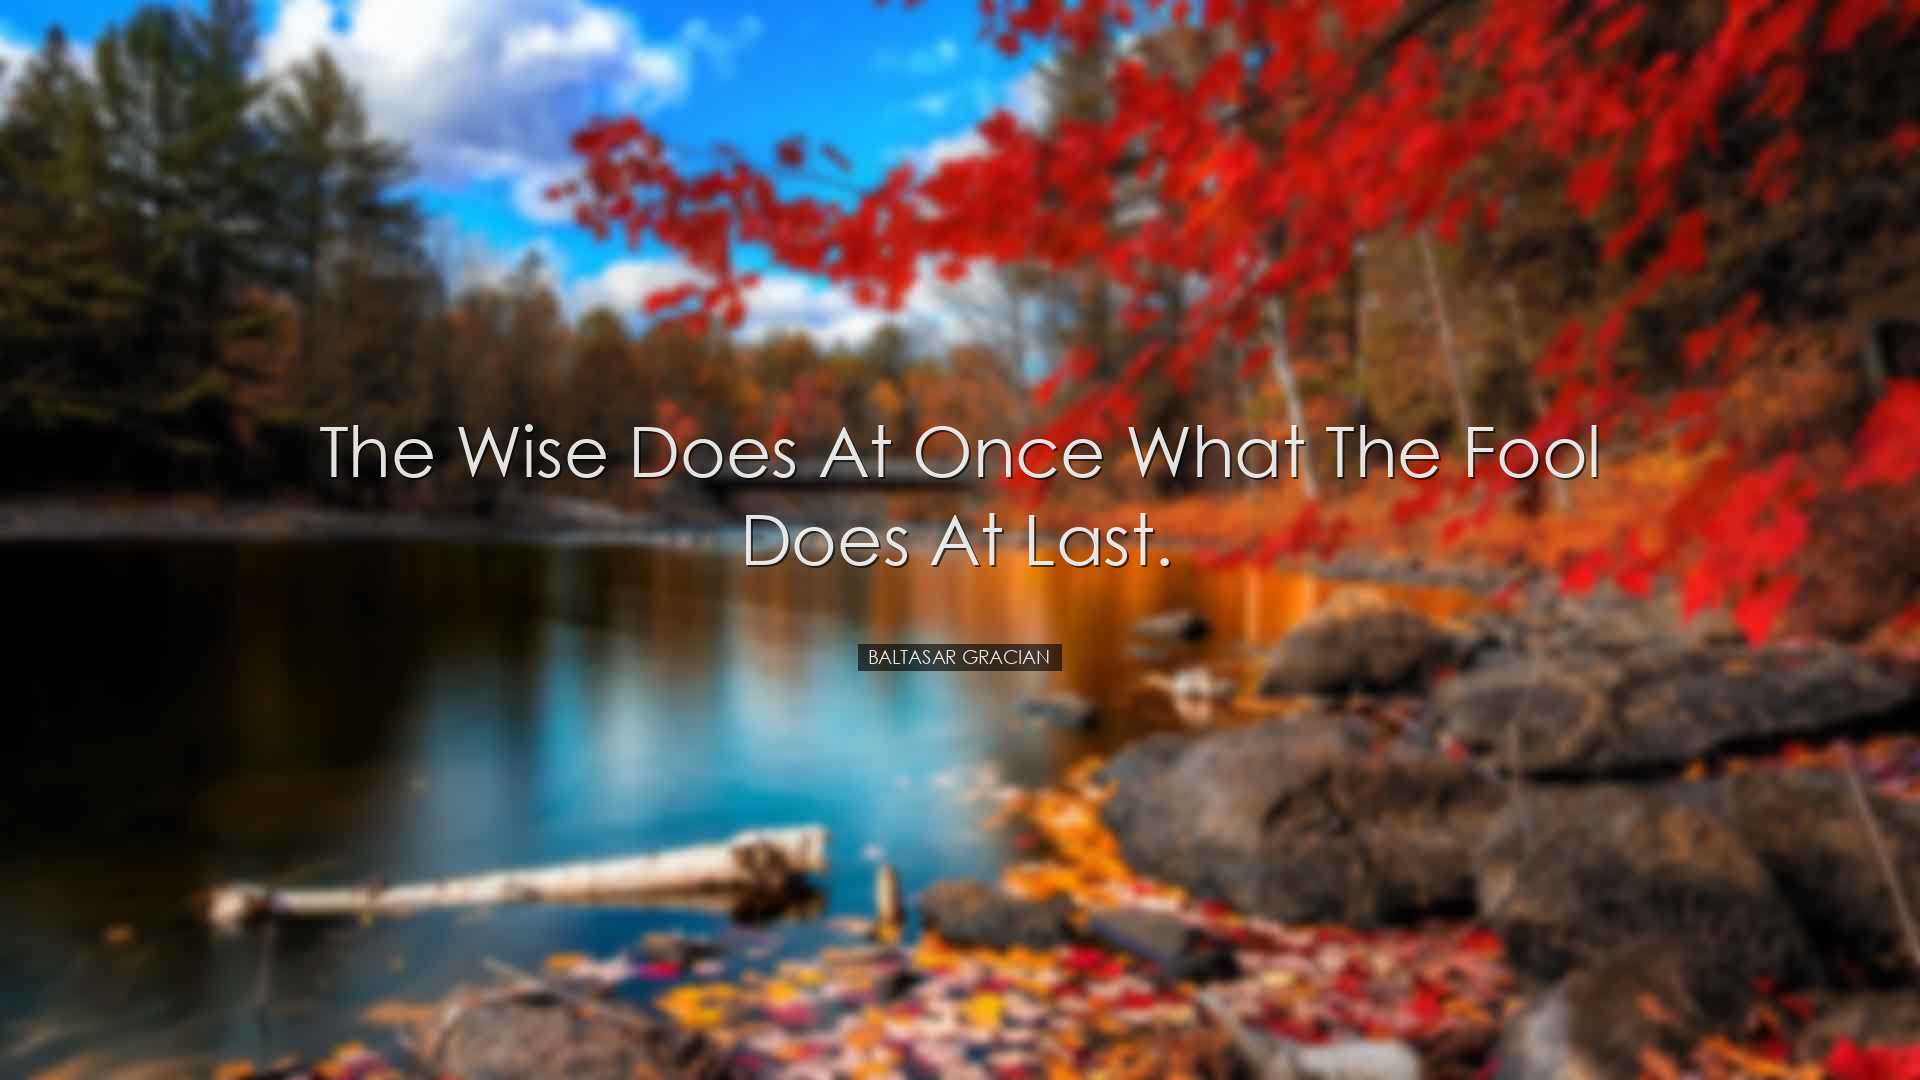 The wise does at once what the fool does at last. - Baltasar Graci